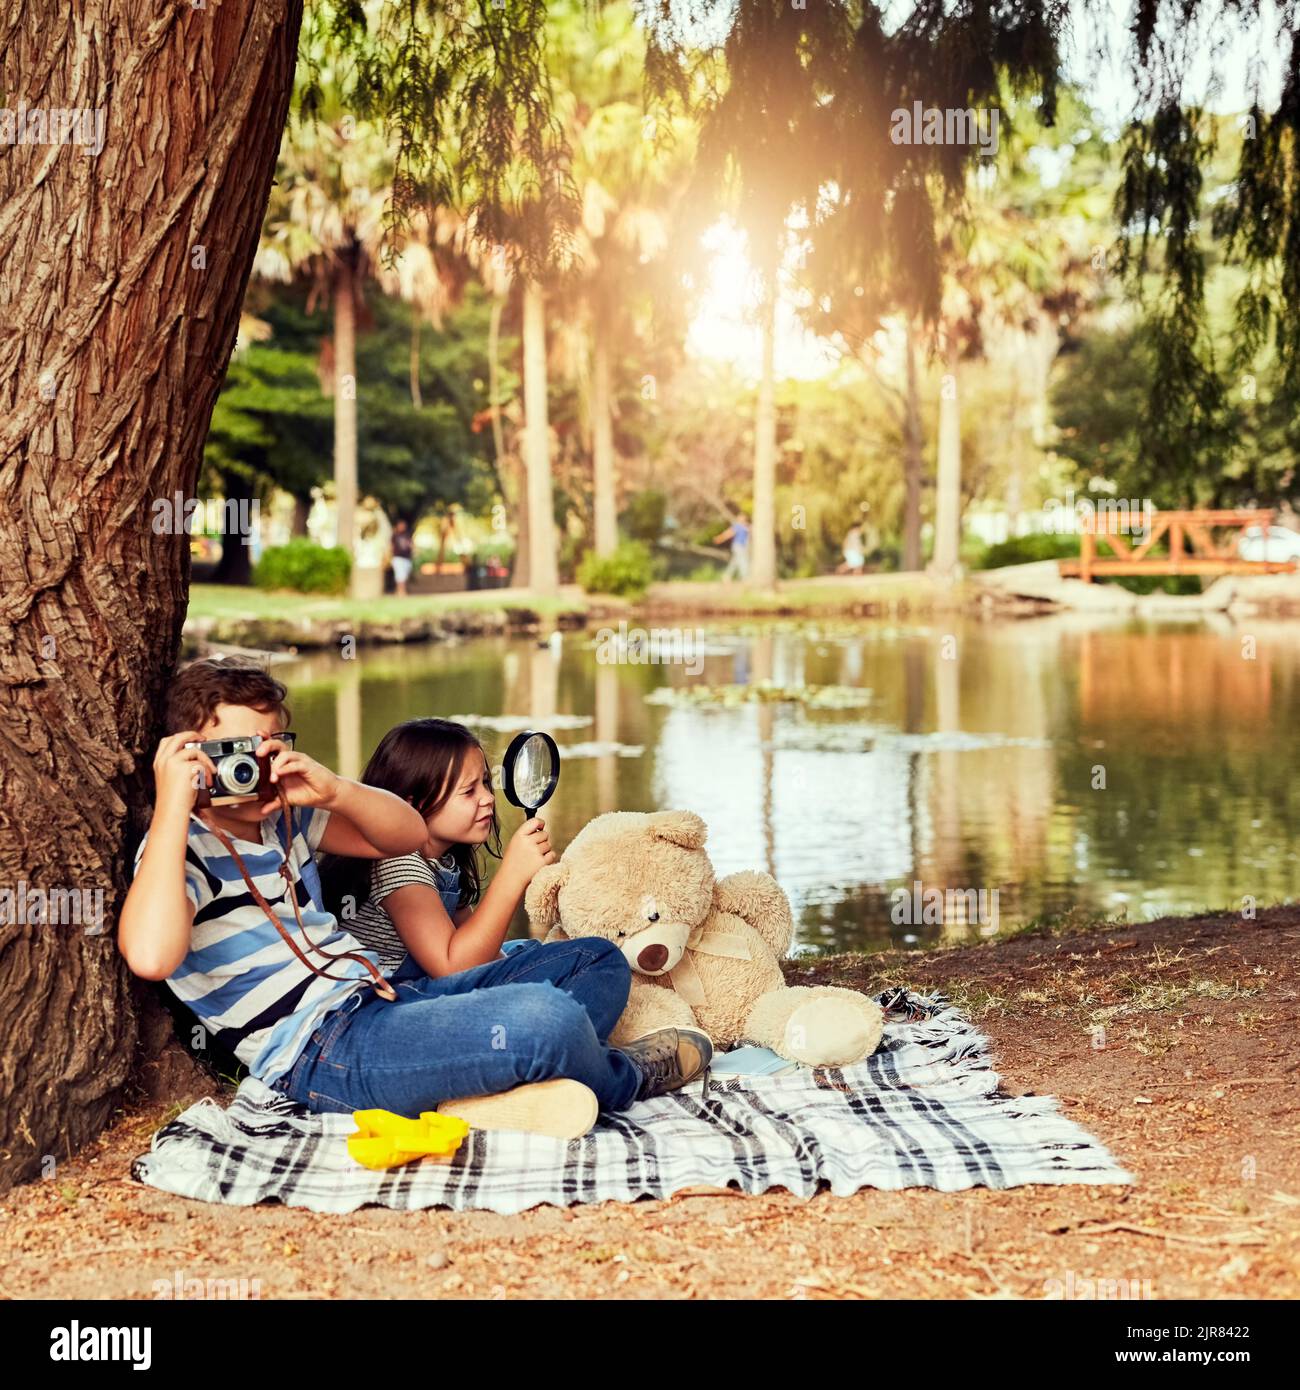 Kids always see the fun in life. two little siblings having fun while sitting on a blanket at the park. Stock Photo